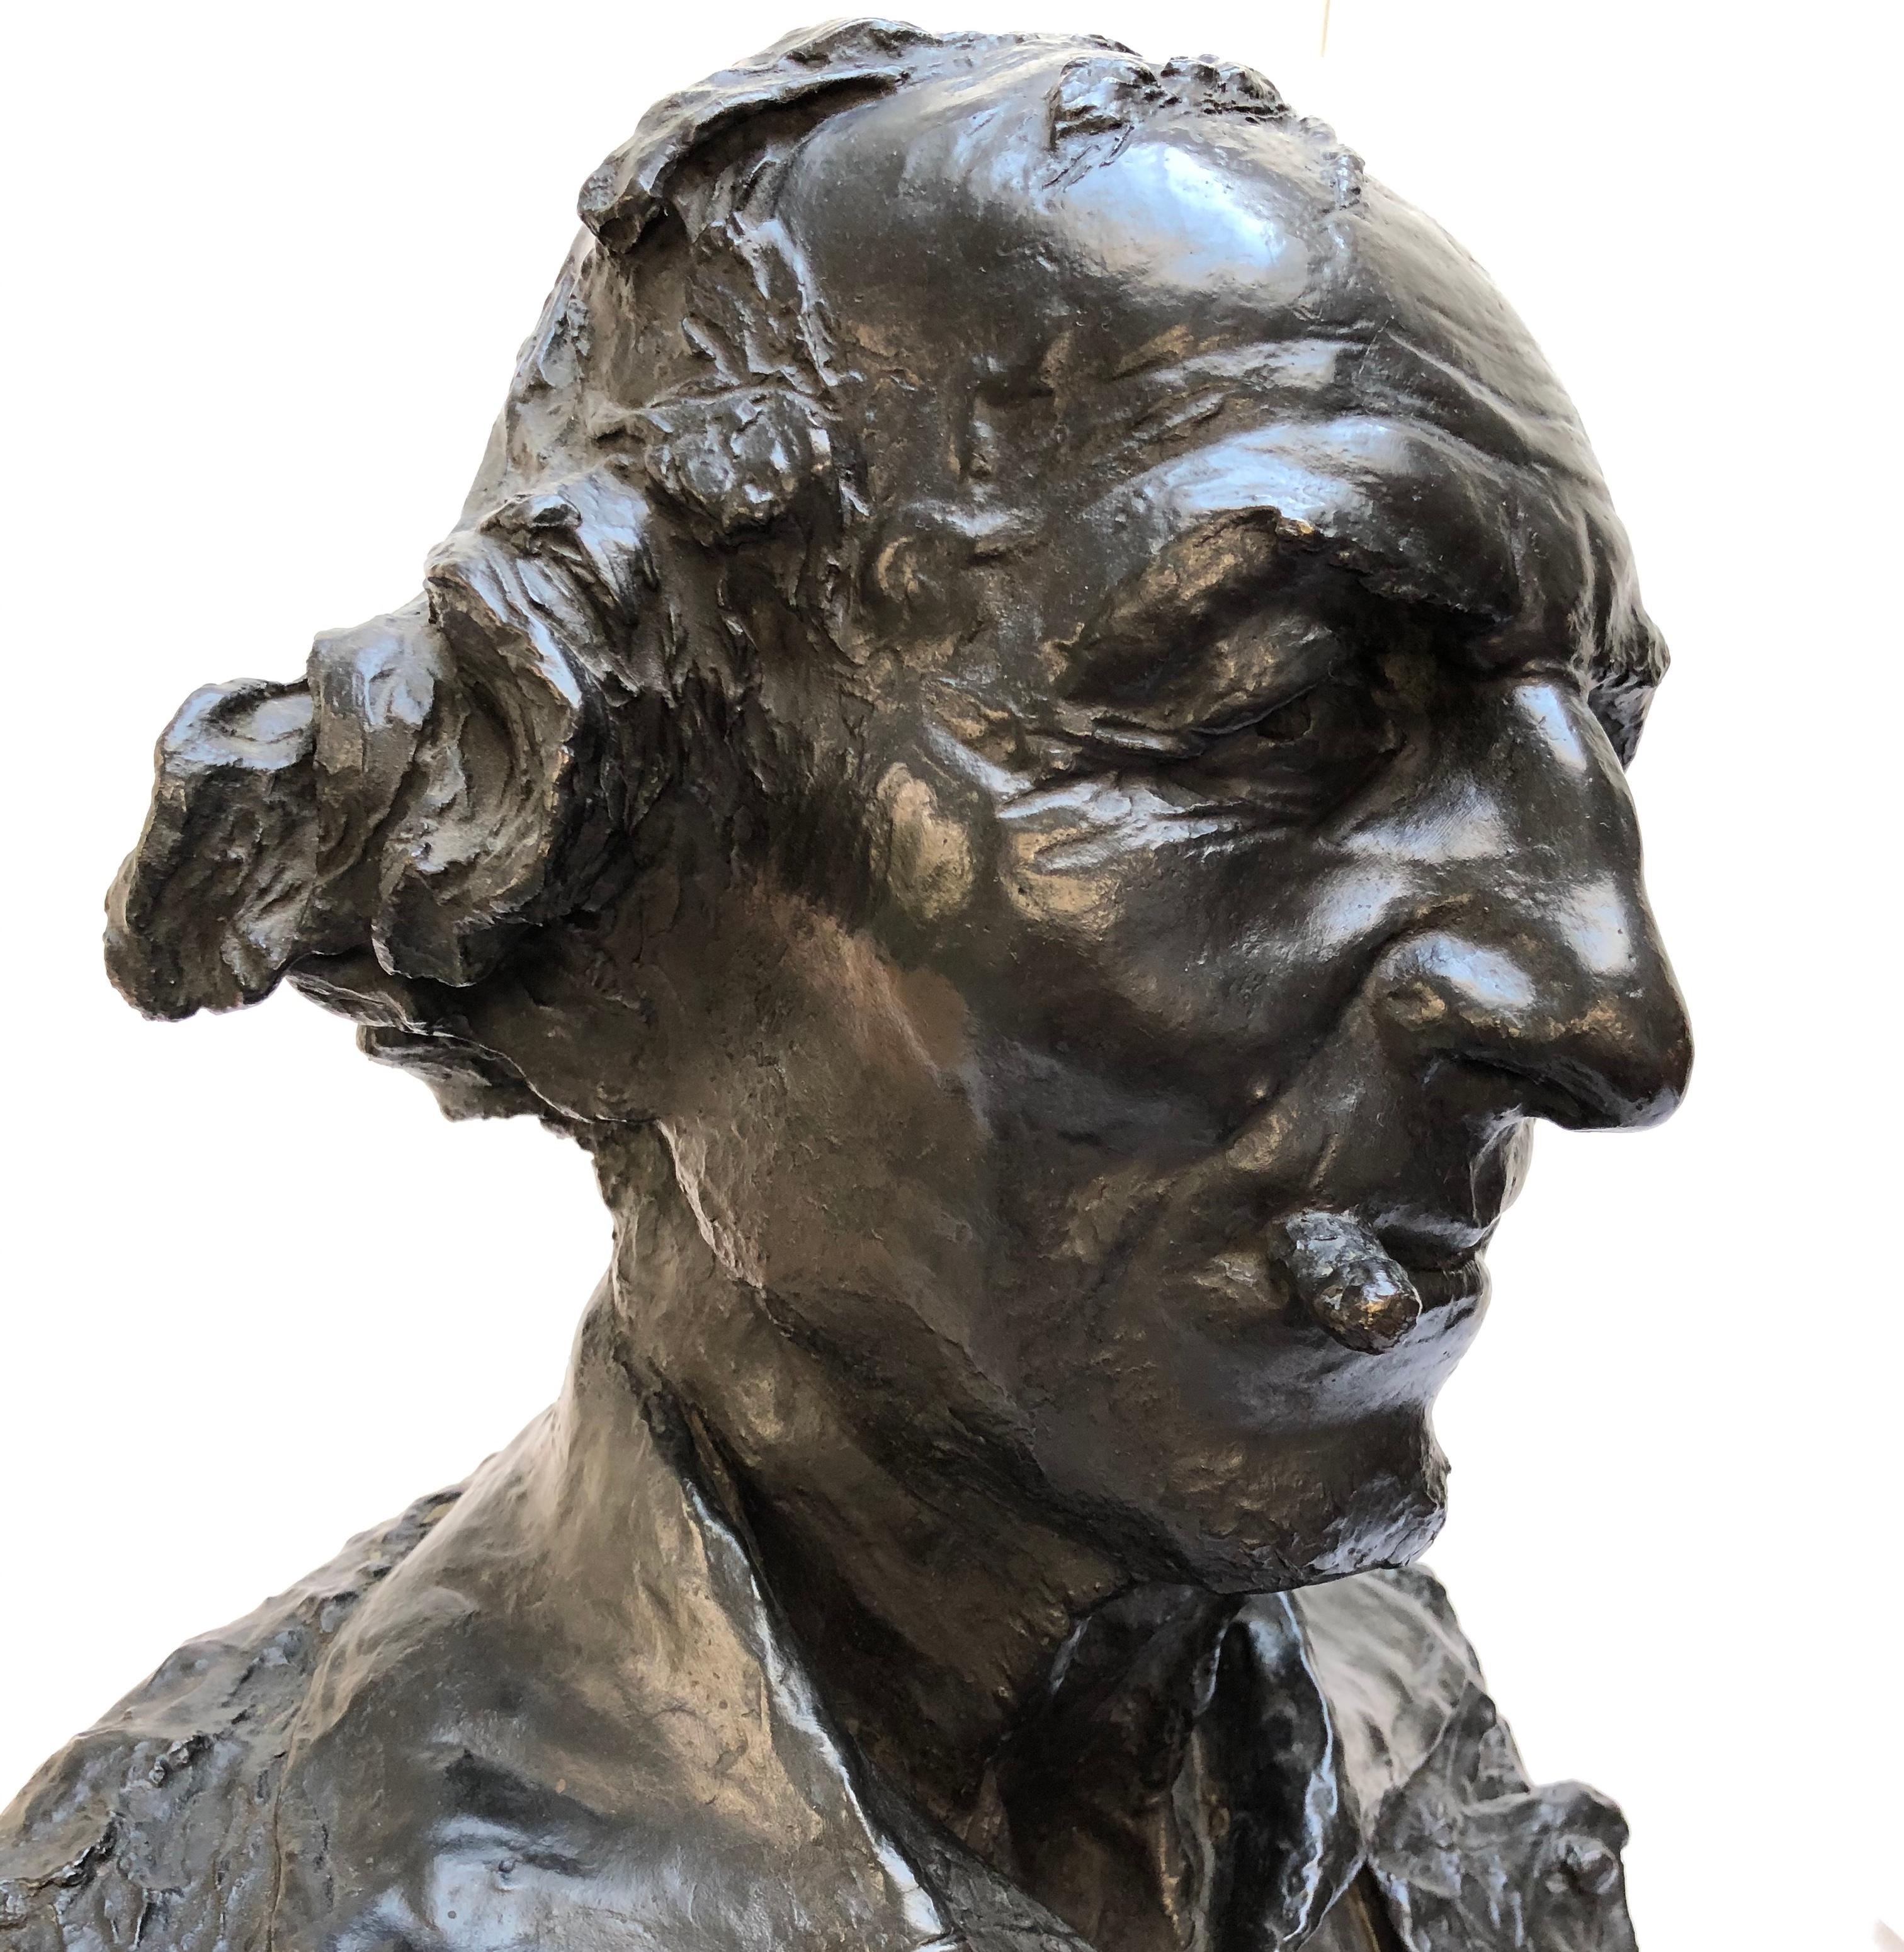 A French bronze bust by Jean-Baptiste Carpeaux, known as “Le Fumeur”, dated 1869
Signed to the back of the shoulder JB Carpeaux, 1869, raised on a Levanto Rosso red marble base
Measures: 55cm high, 31cm wide, 25cm deep
Provenance: Sotheby’s New